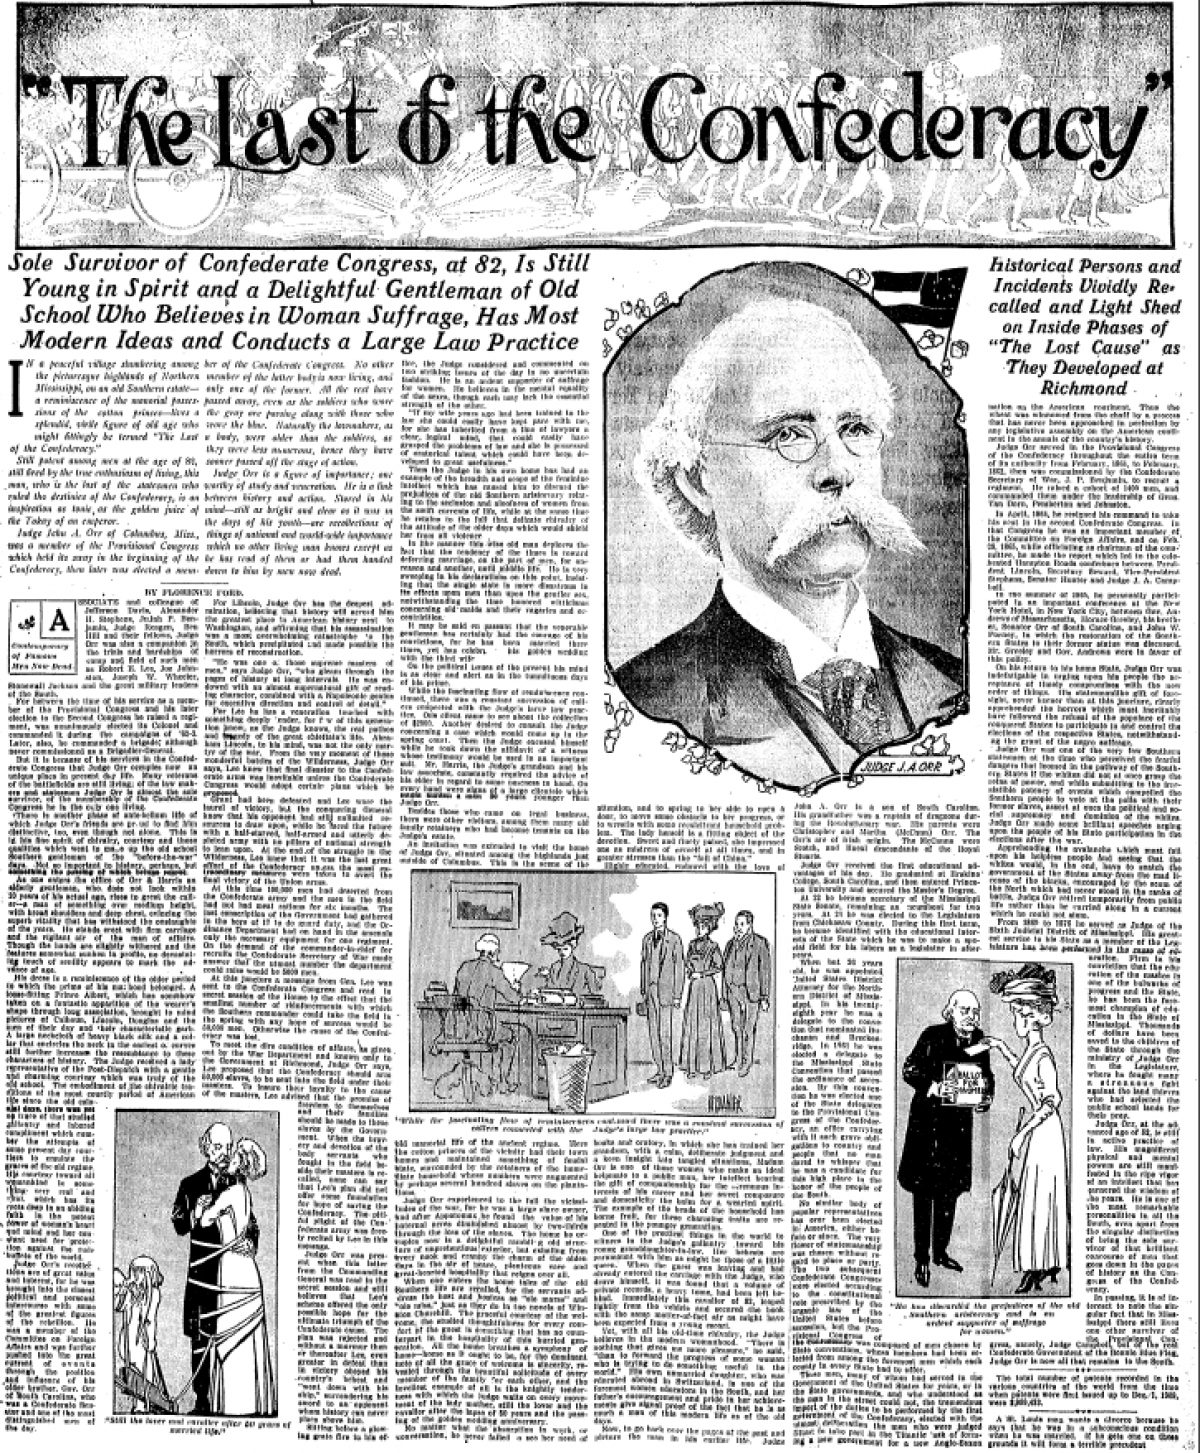 "The Last of the Confederacy"